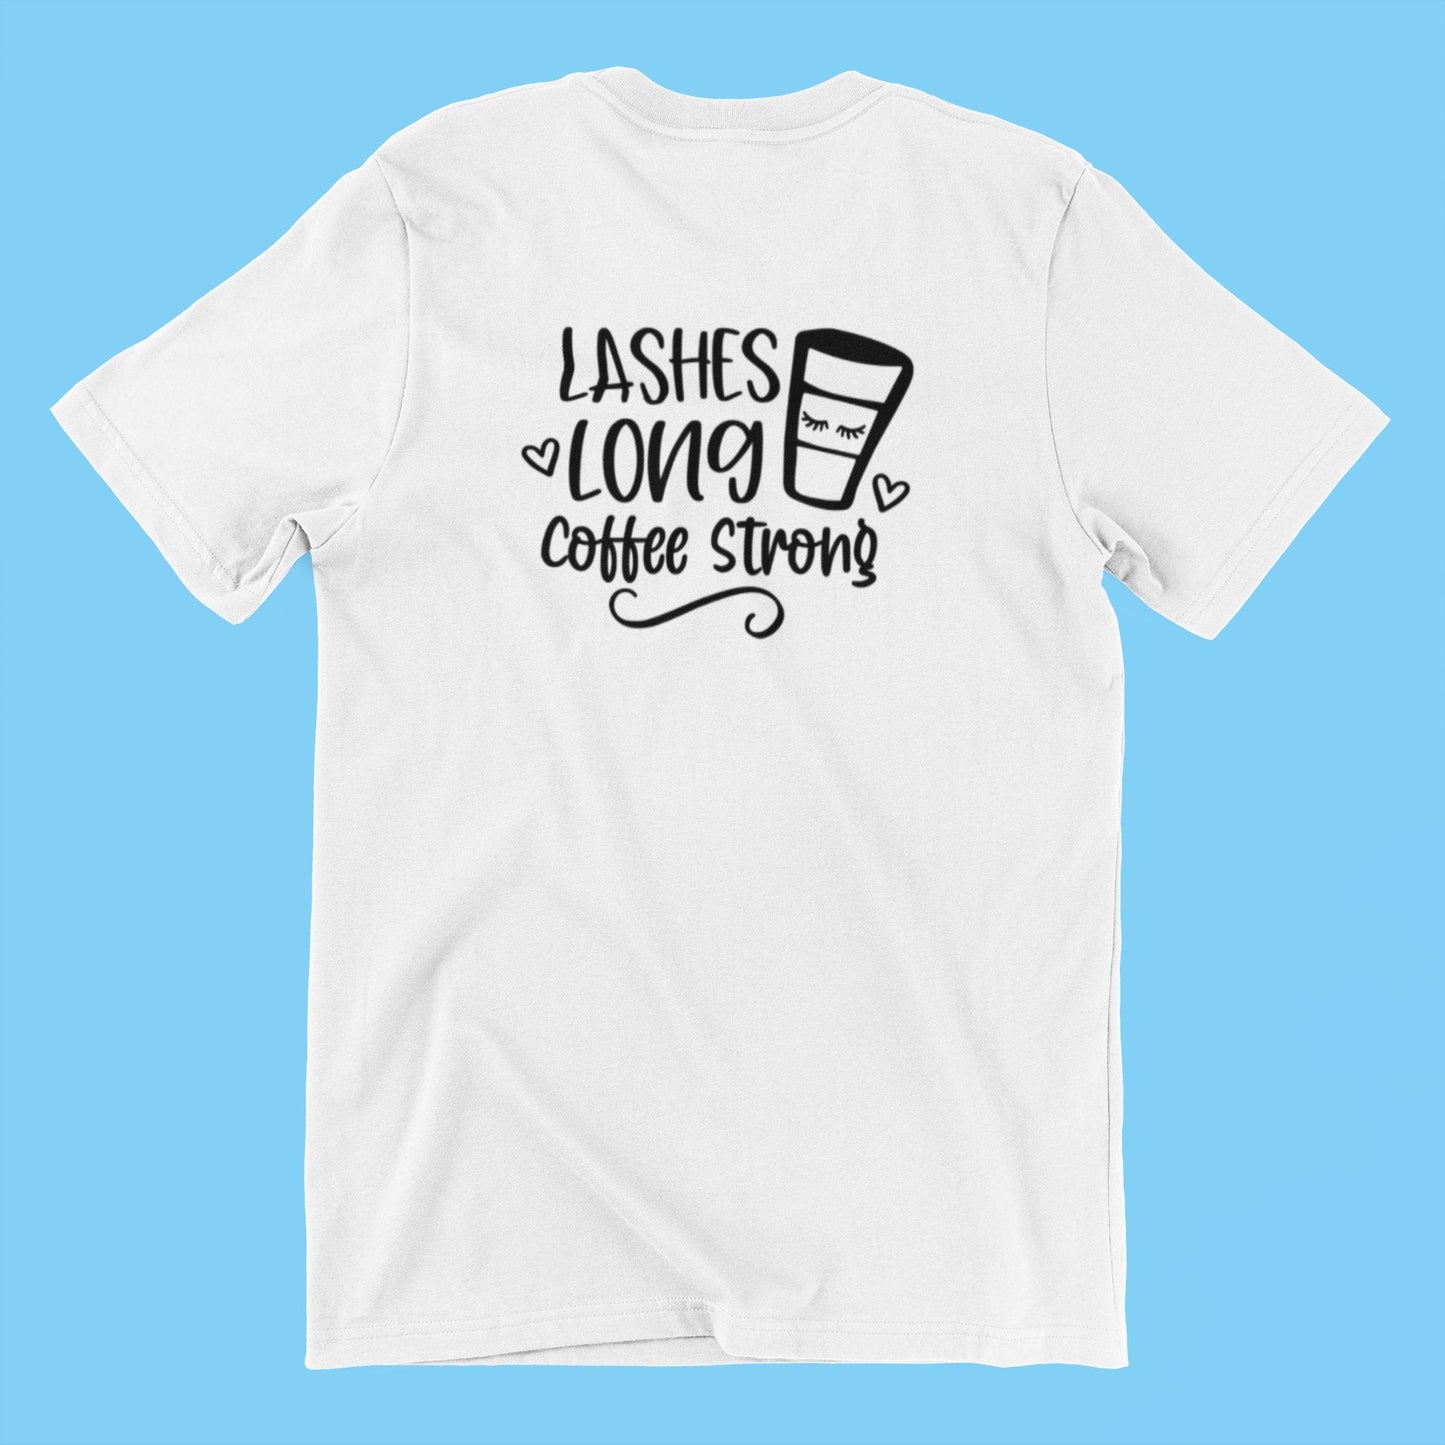 Lashes Long and Coffee Strong Shirt